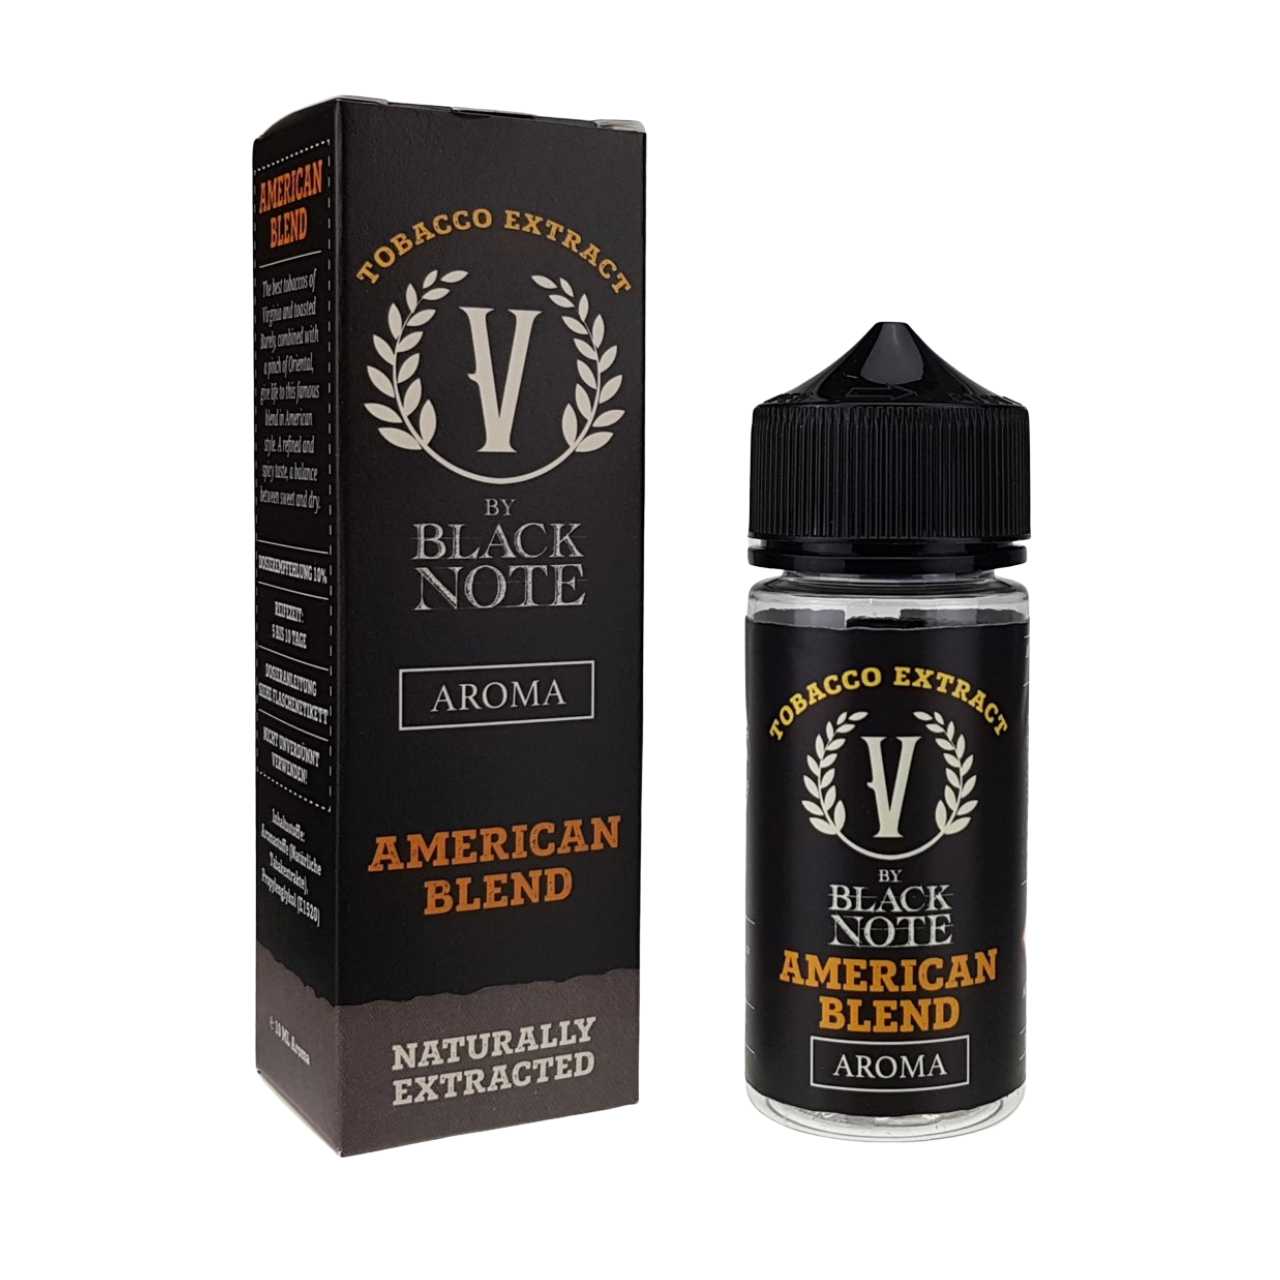 V by Black Note American Blend Aroma Longfill